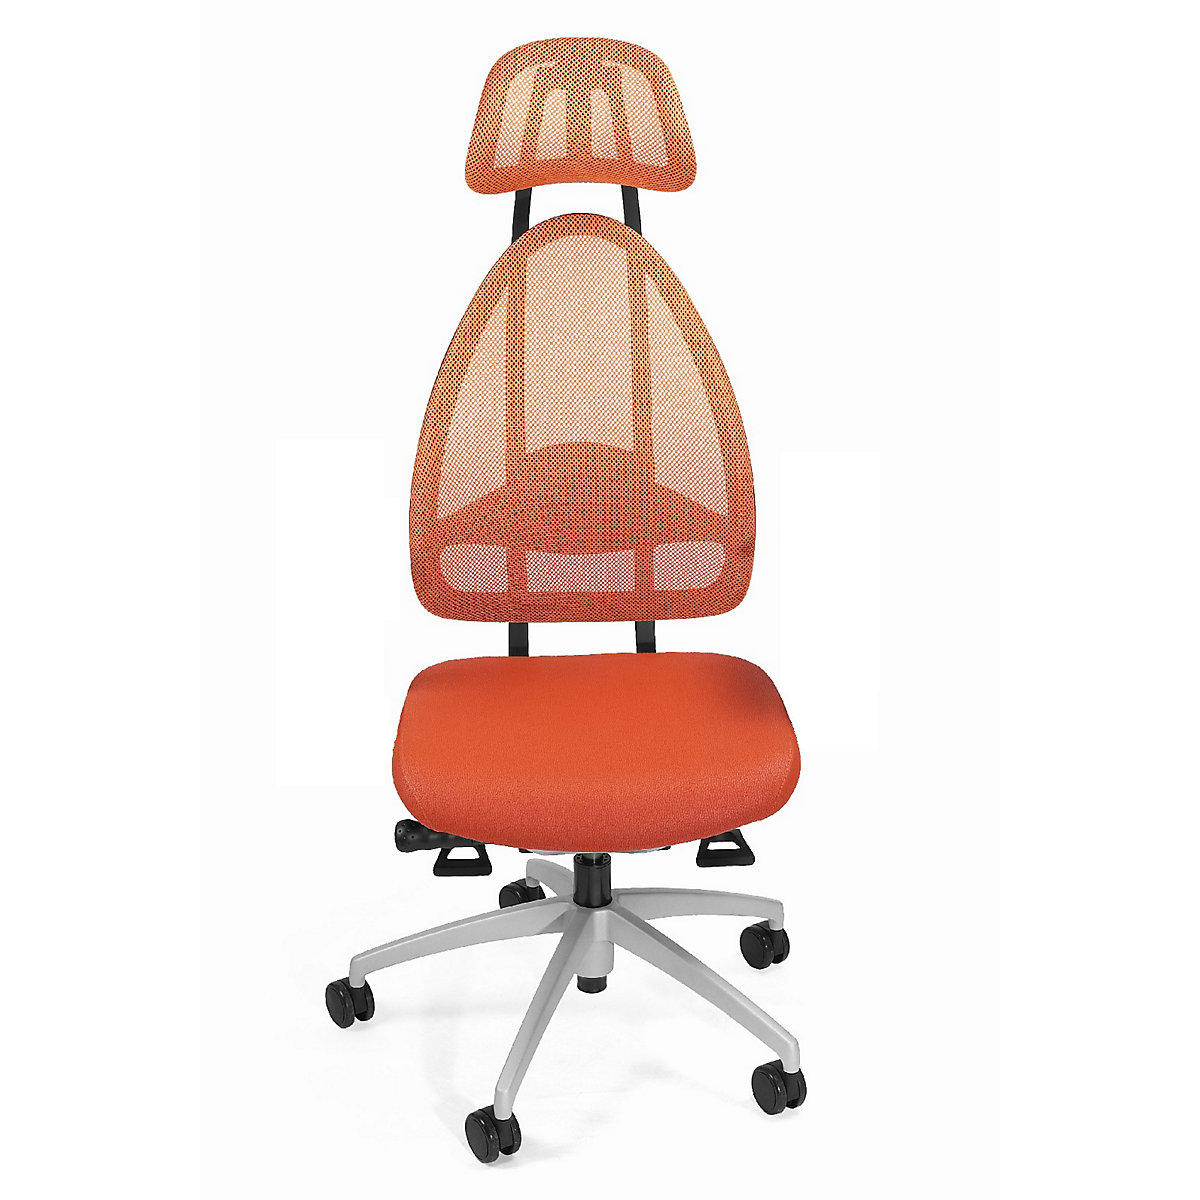 Designer office swivel chair, with head rest and mesh back rest – Topstar